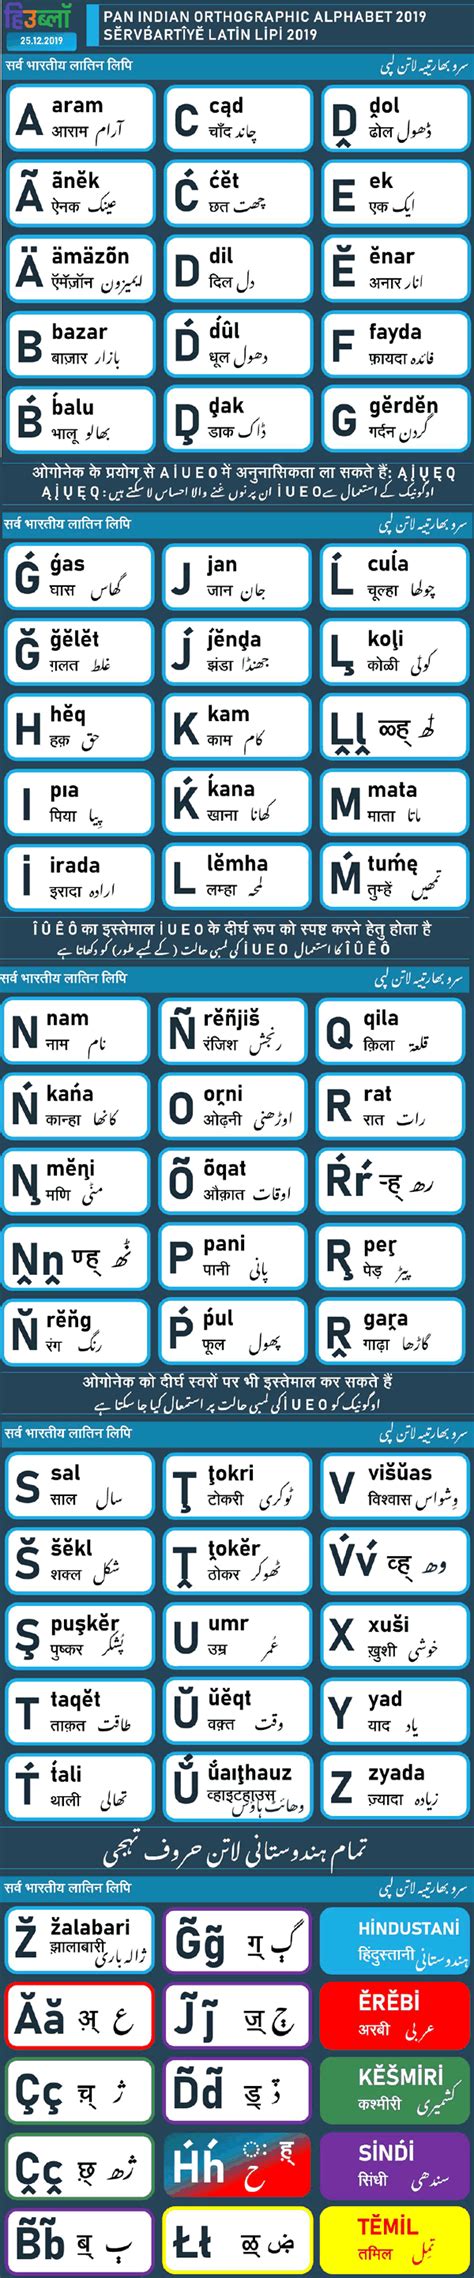 Indian Phonetic Alphabet Police And Military Phonetic Alphabet Codes